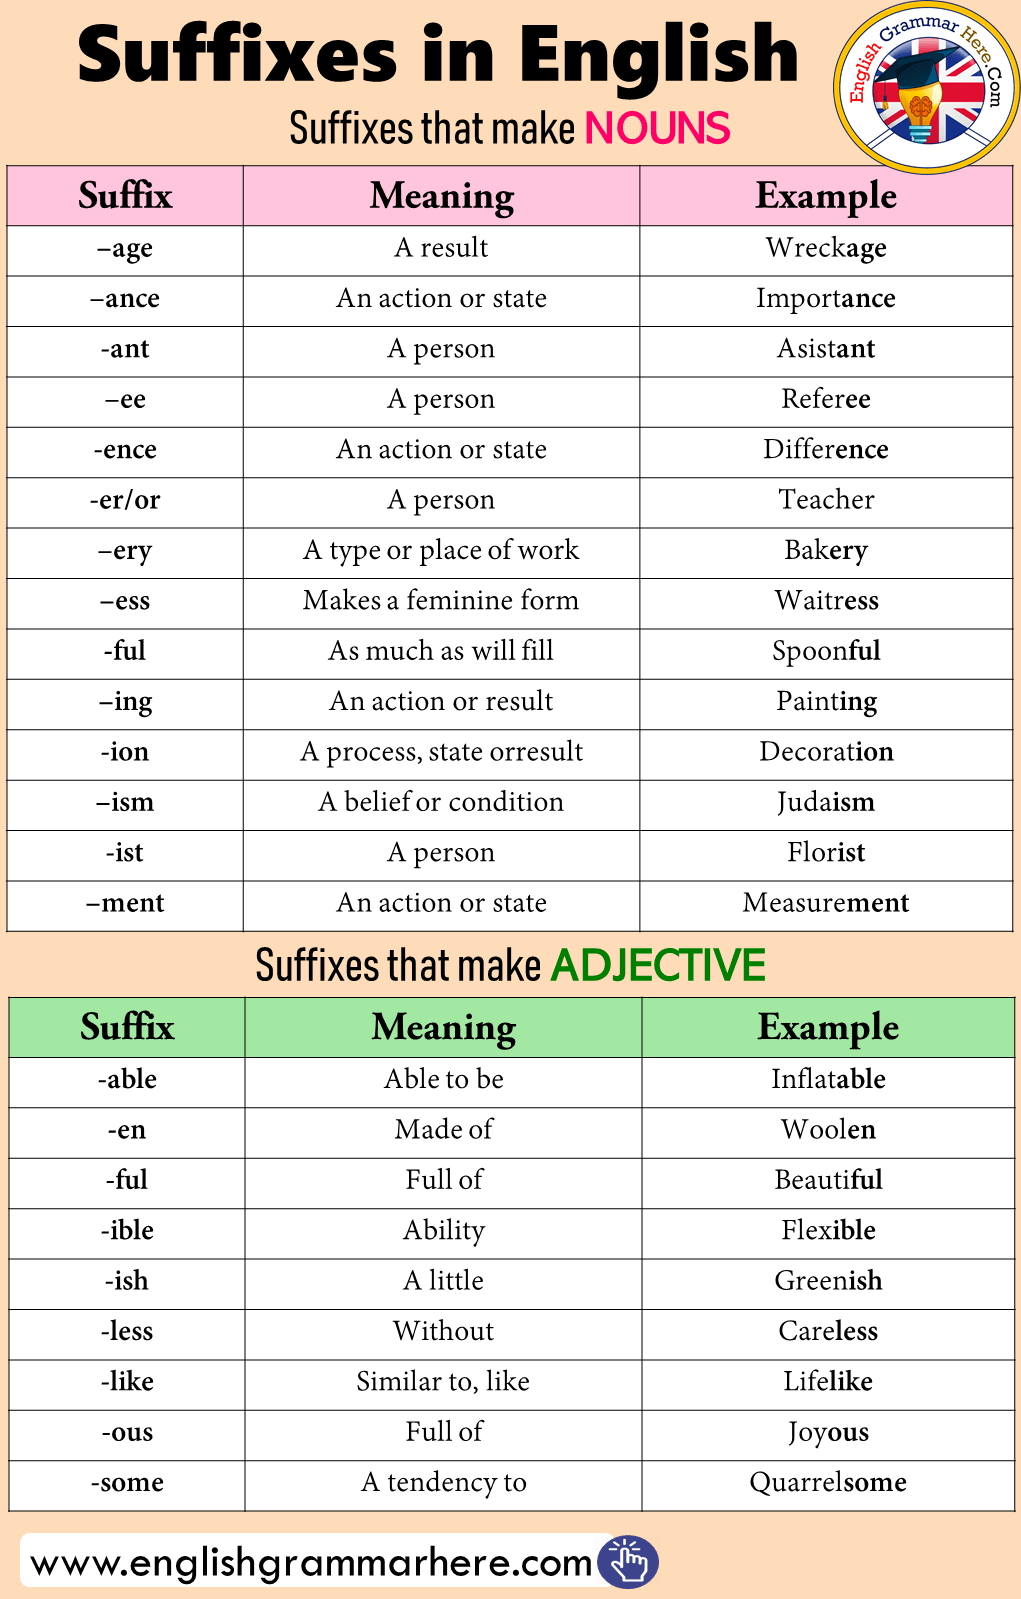 Suffixes in English - English Grammar Here